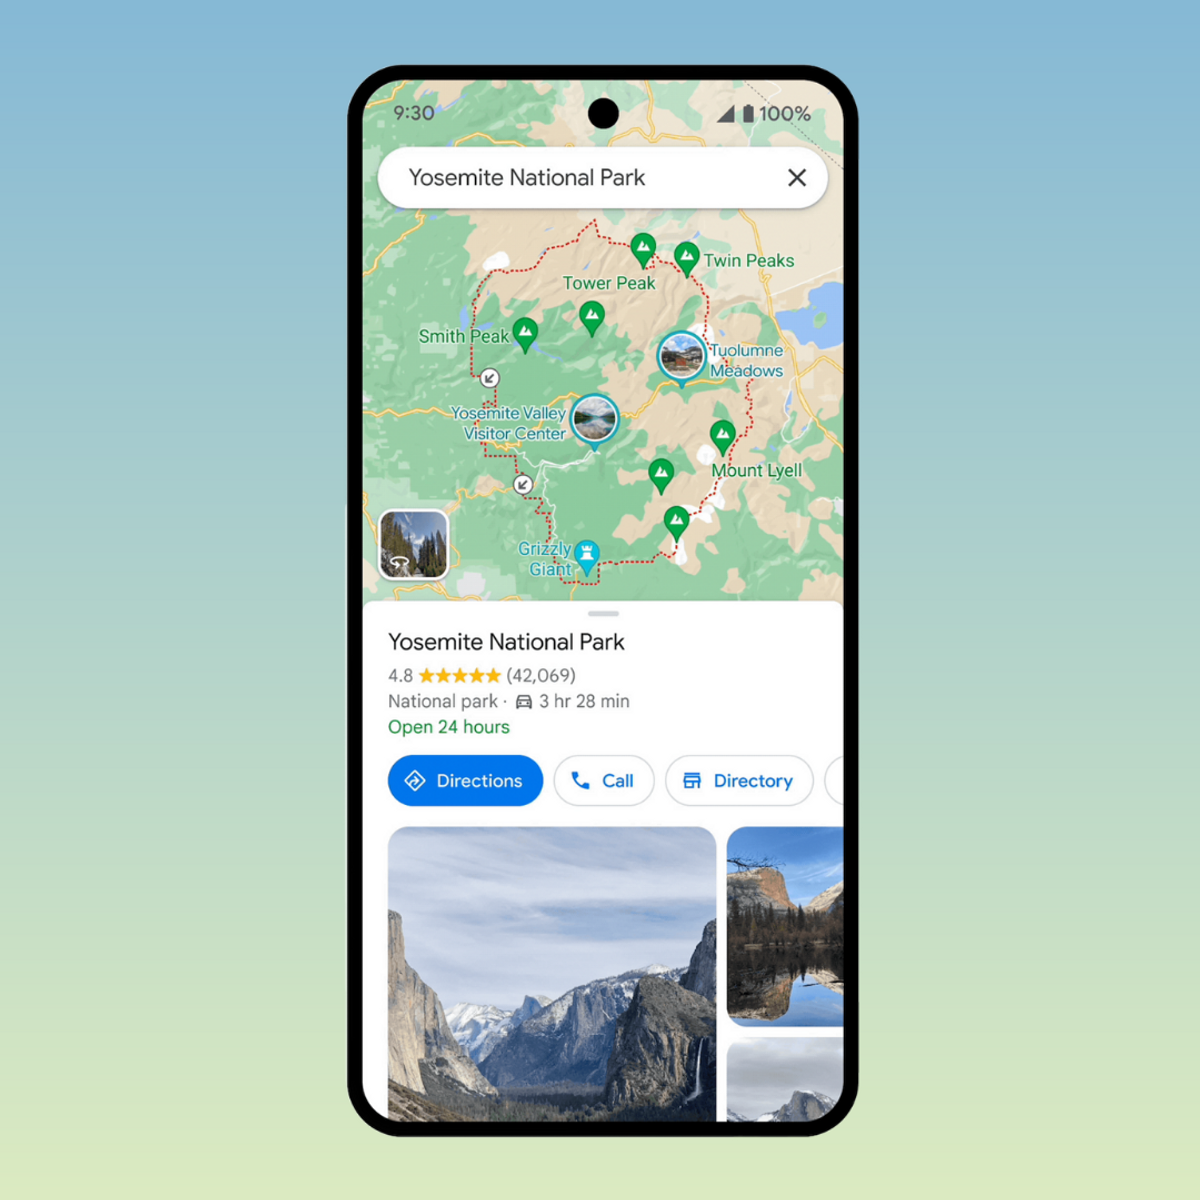 6 New Google Maps Features To Make Your Next National Parks Trip Painless